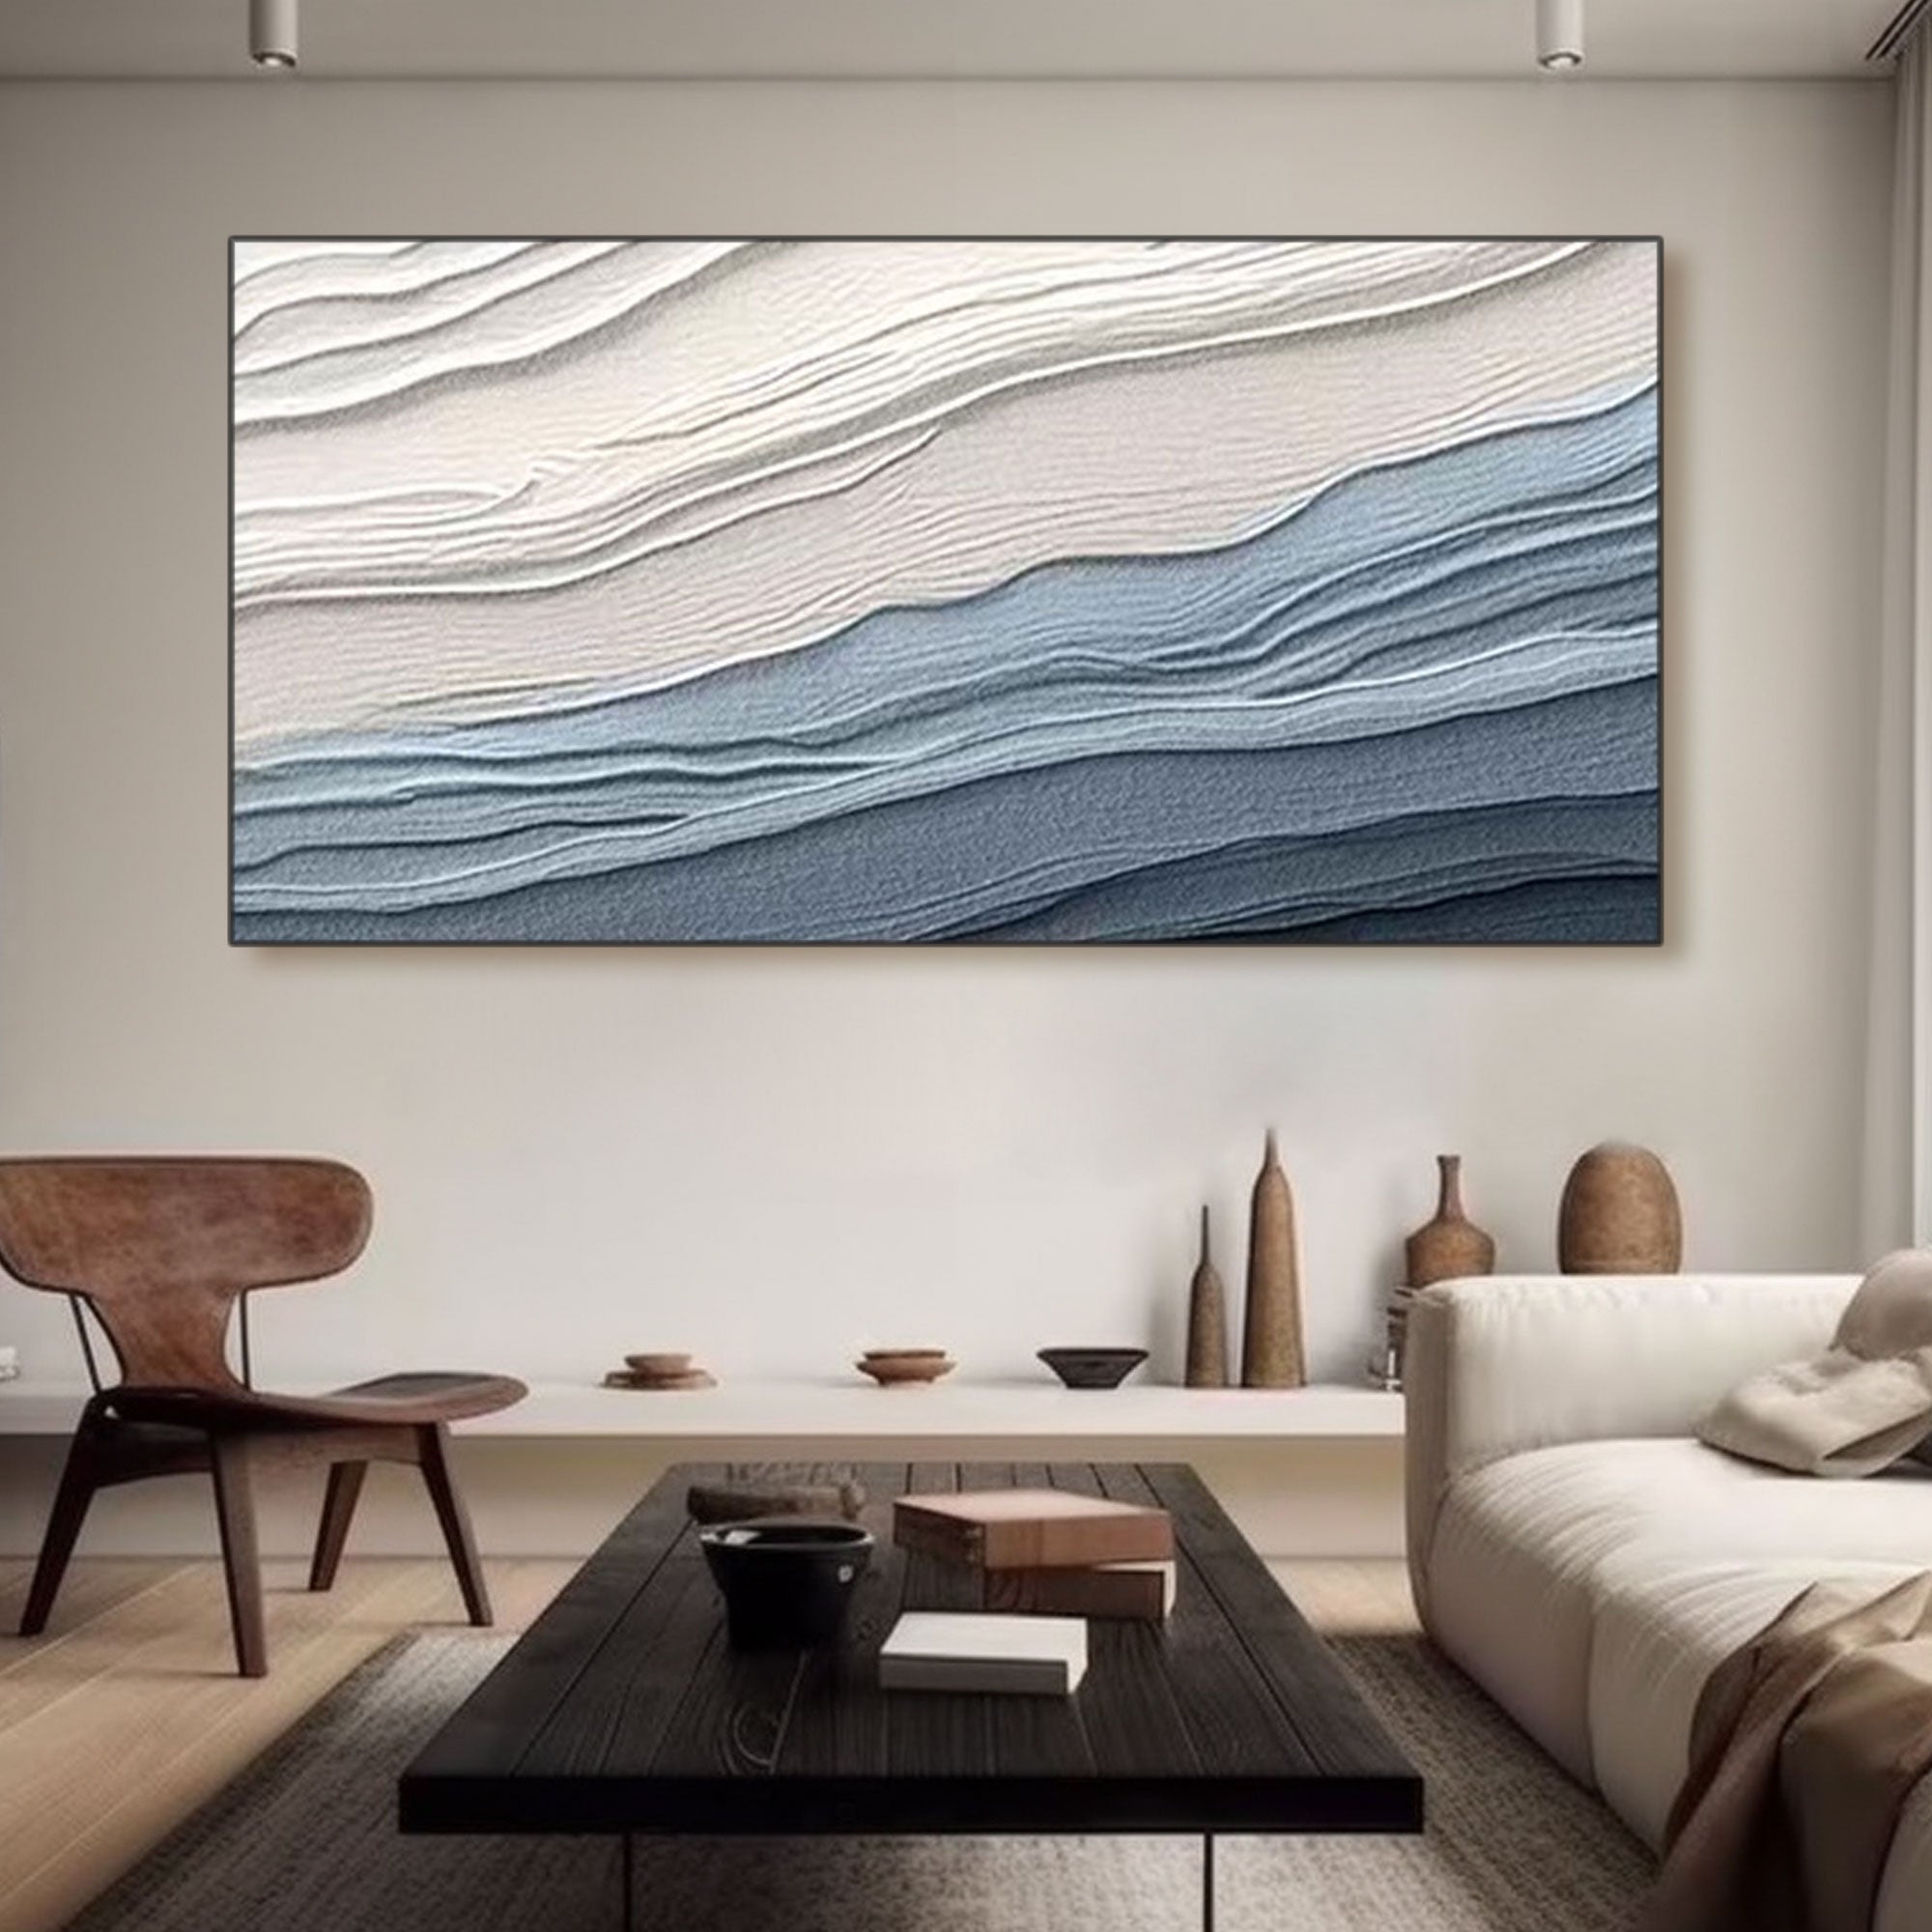 3D Textured Abstract Painting "Serenity Waves"